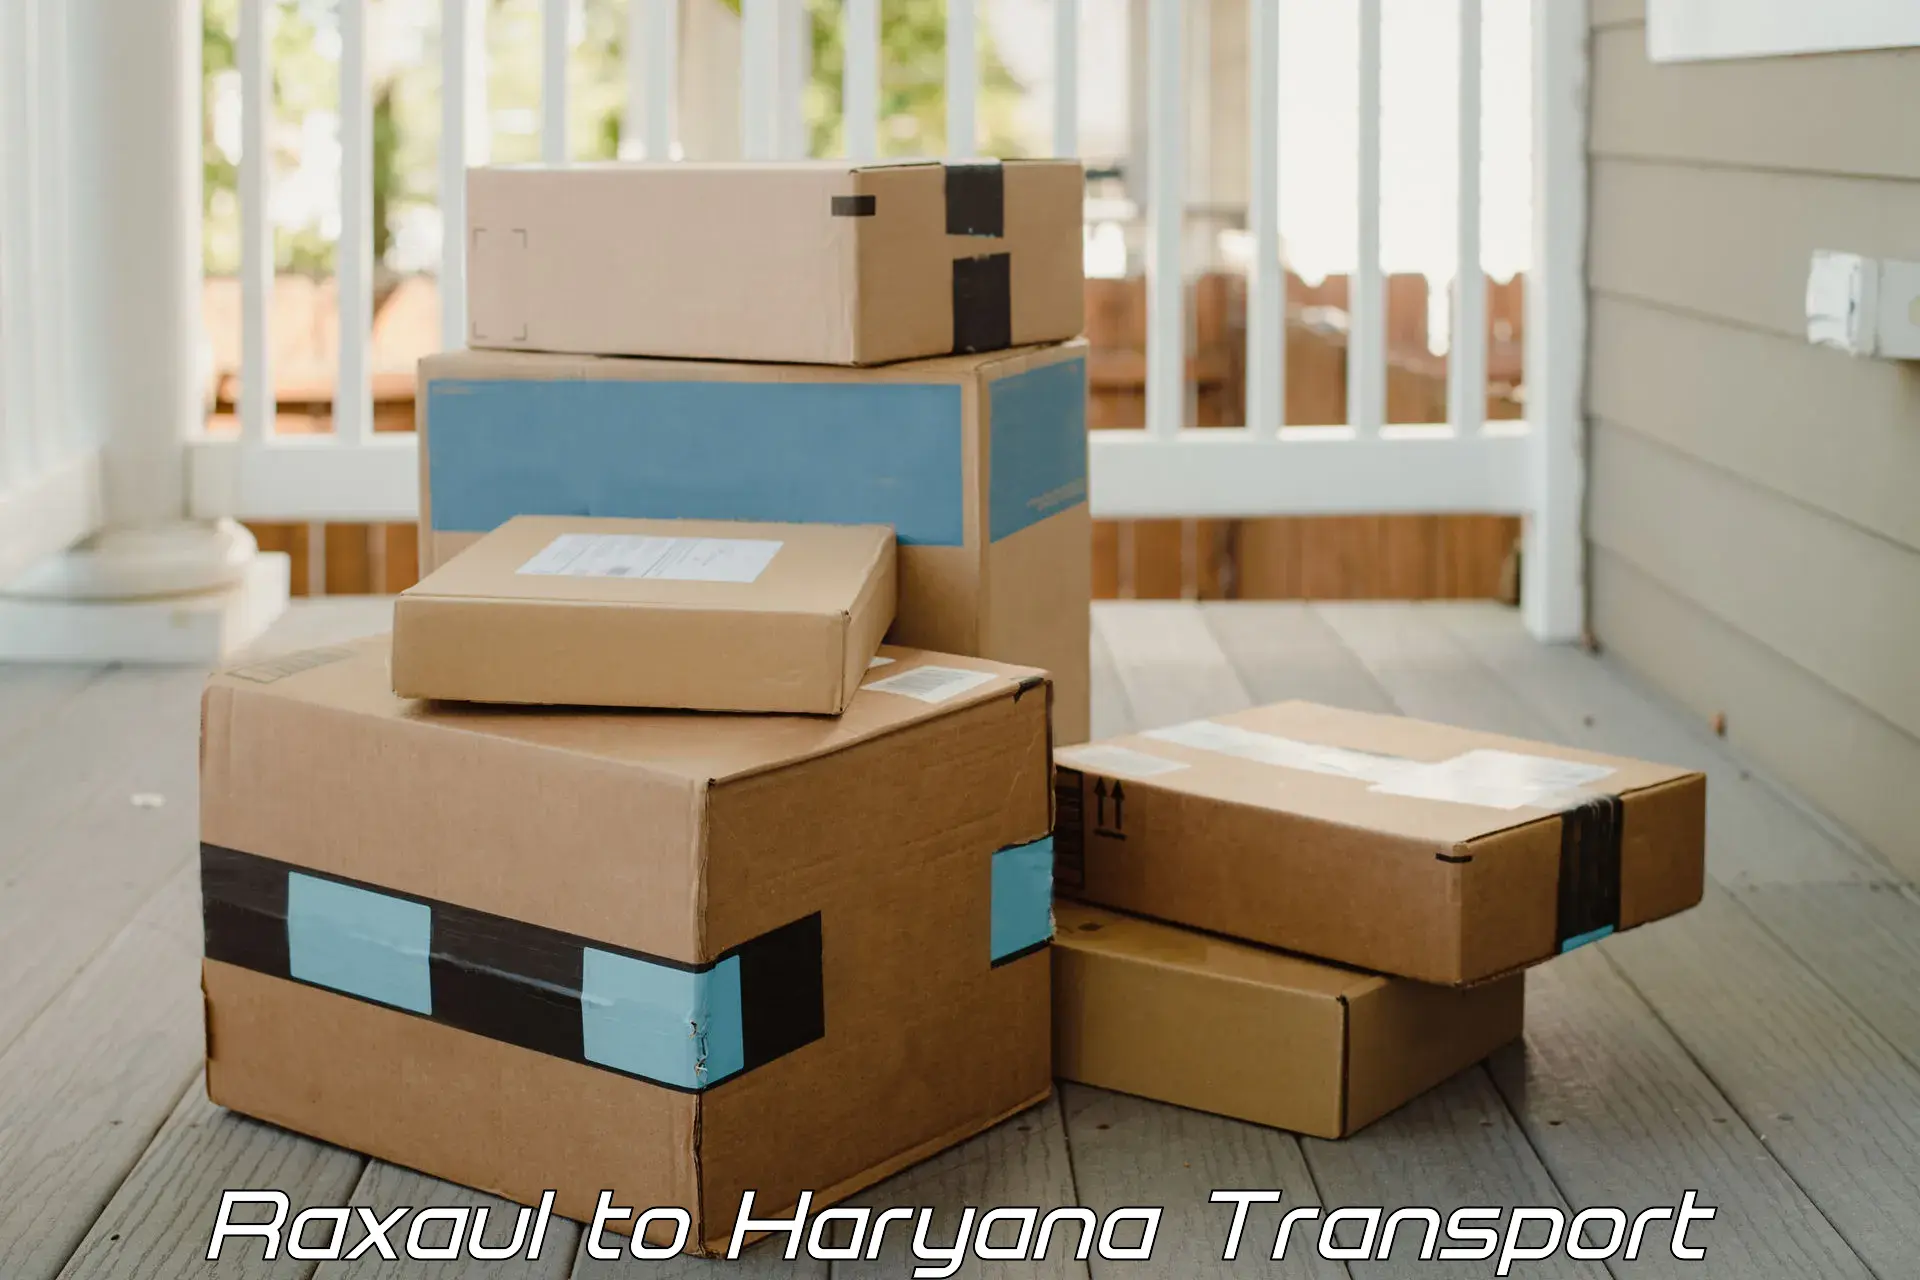 Land transport services in Raxaul to Gurgaon